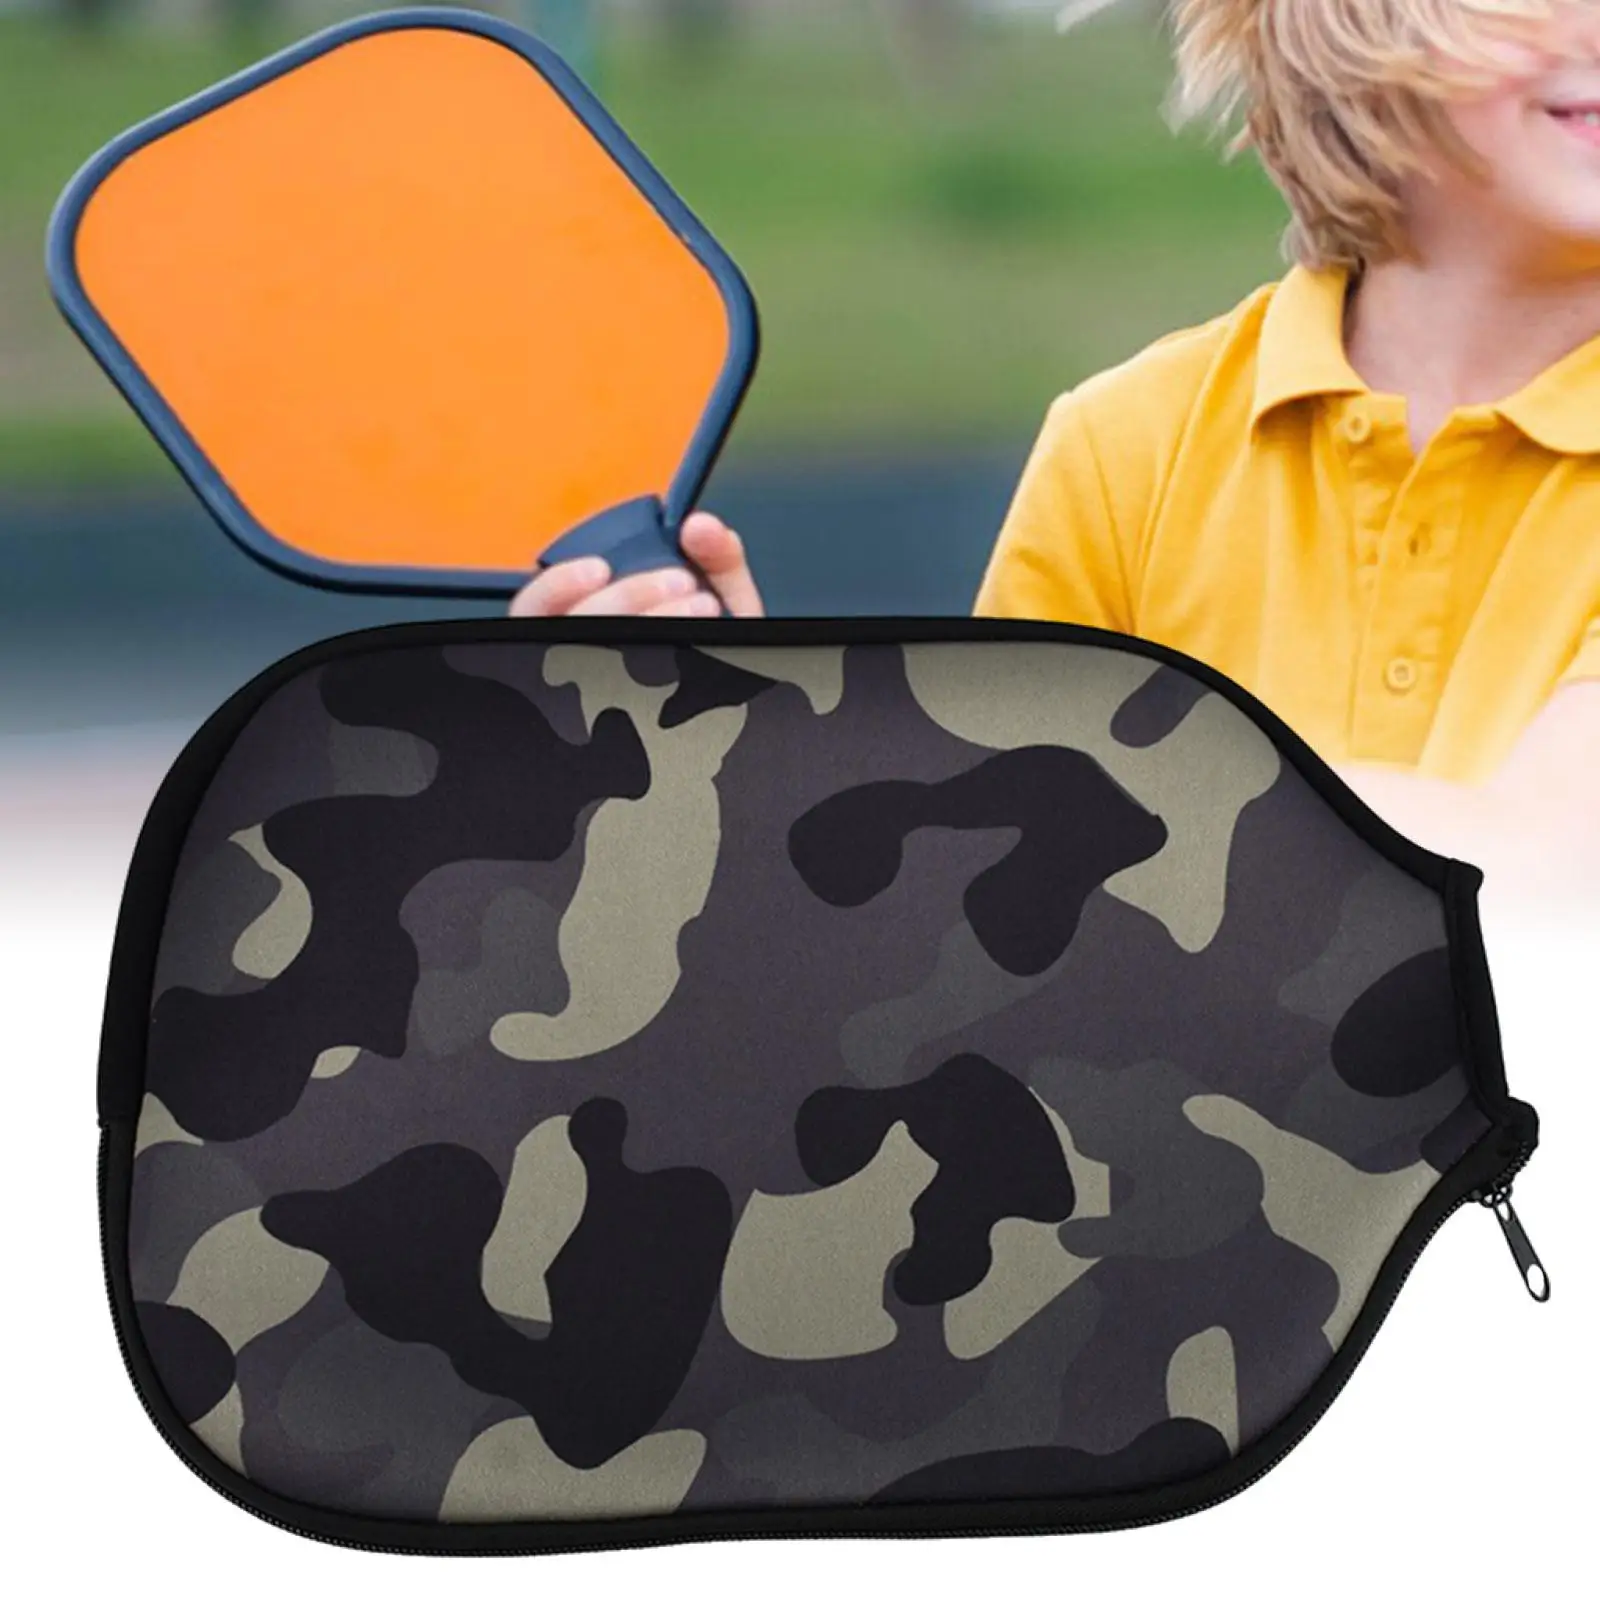 Pickleball Racket Cover Portable Fits Most Paddle, Racket Women Men Pickleball Racket Cover for Training Sports Practice Outdoor